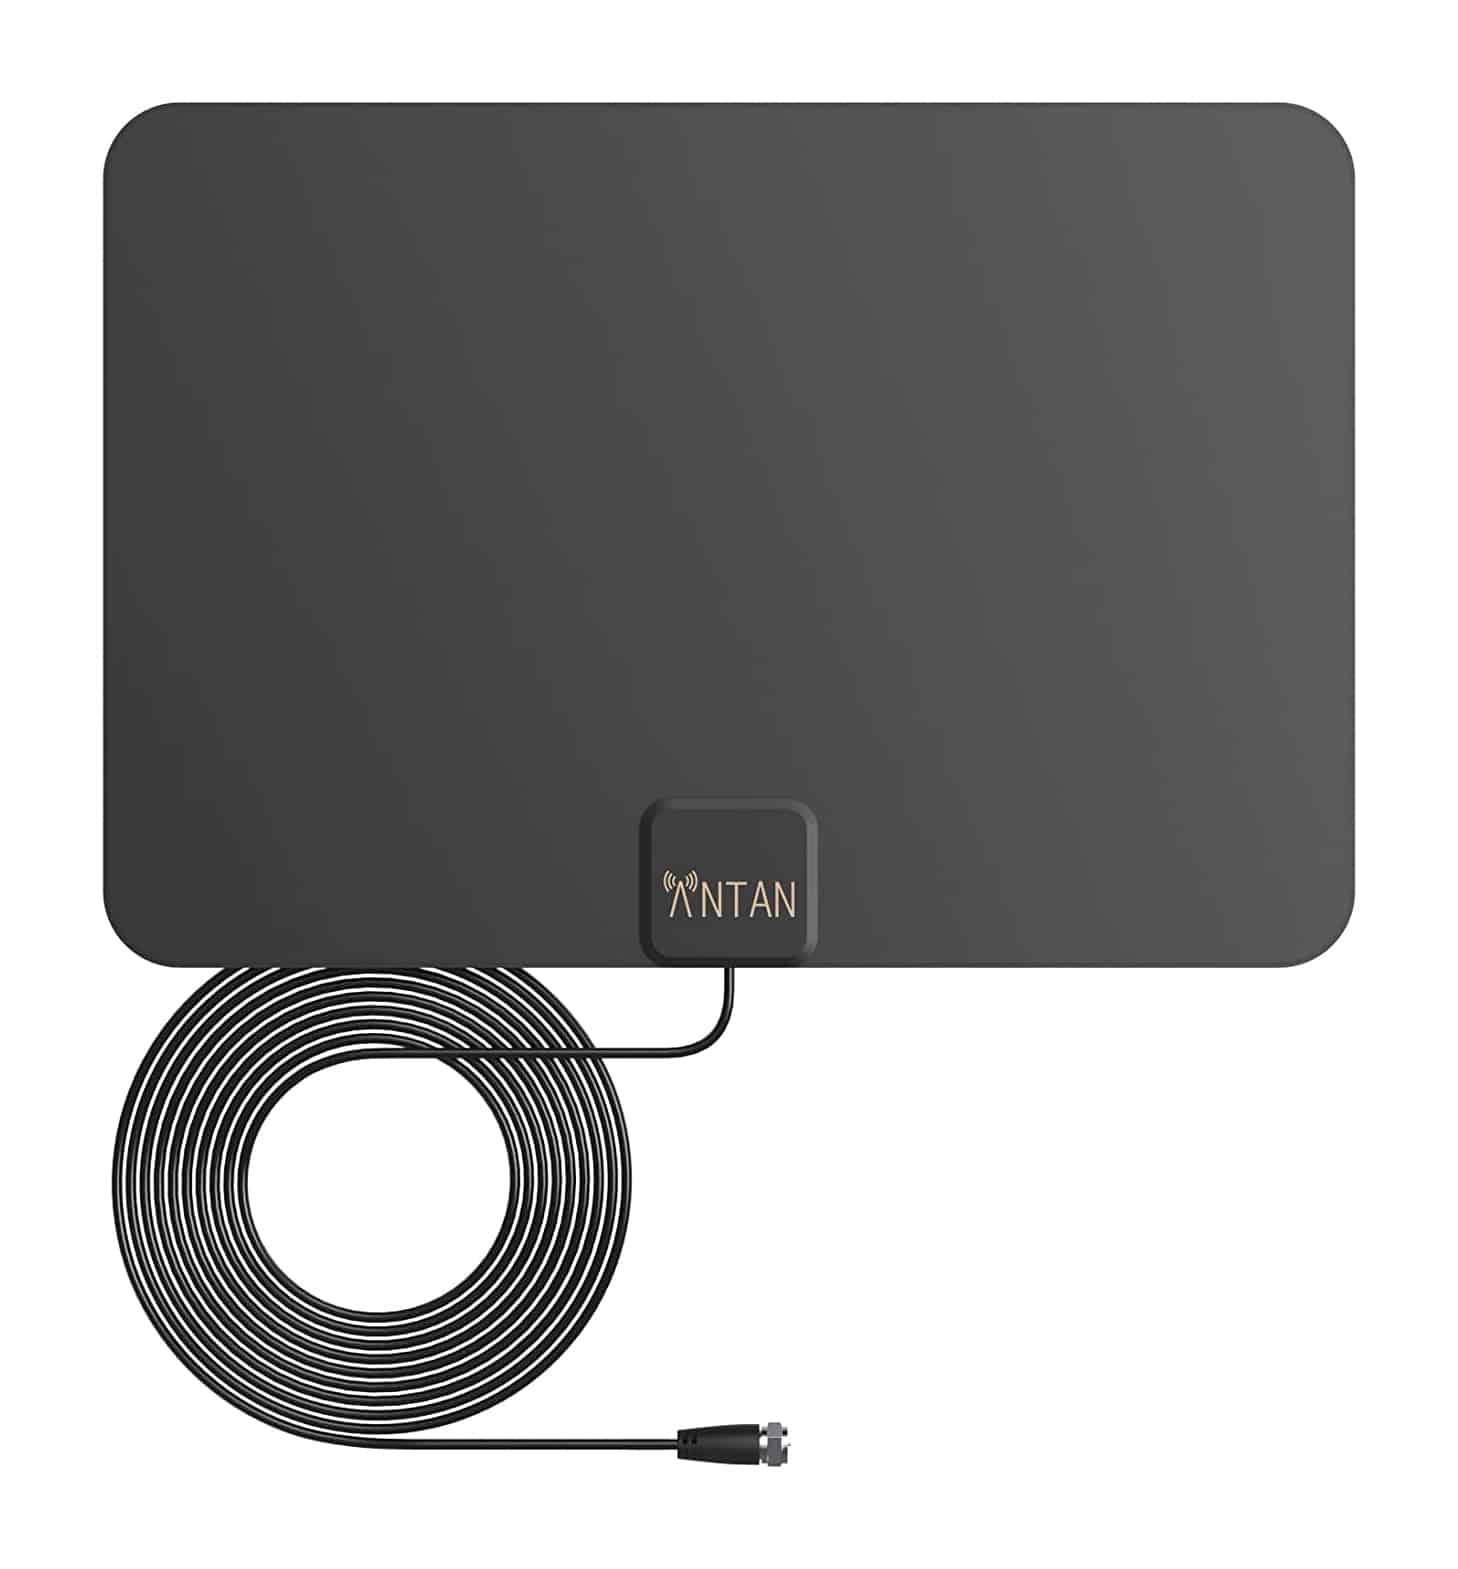 How to Choose a TV Antenna